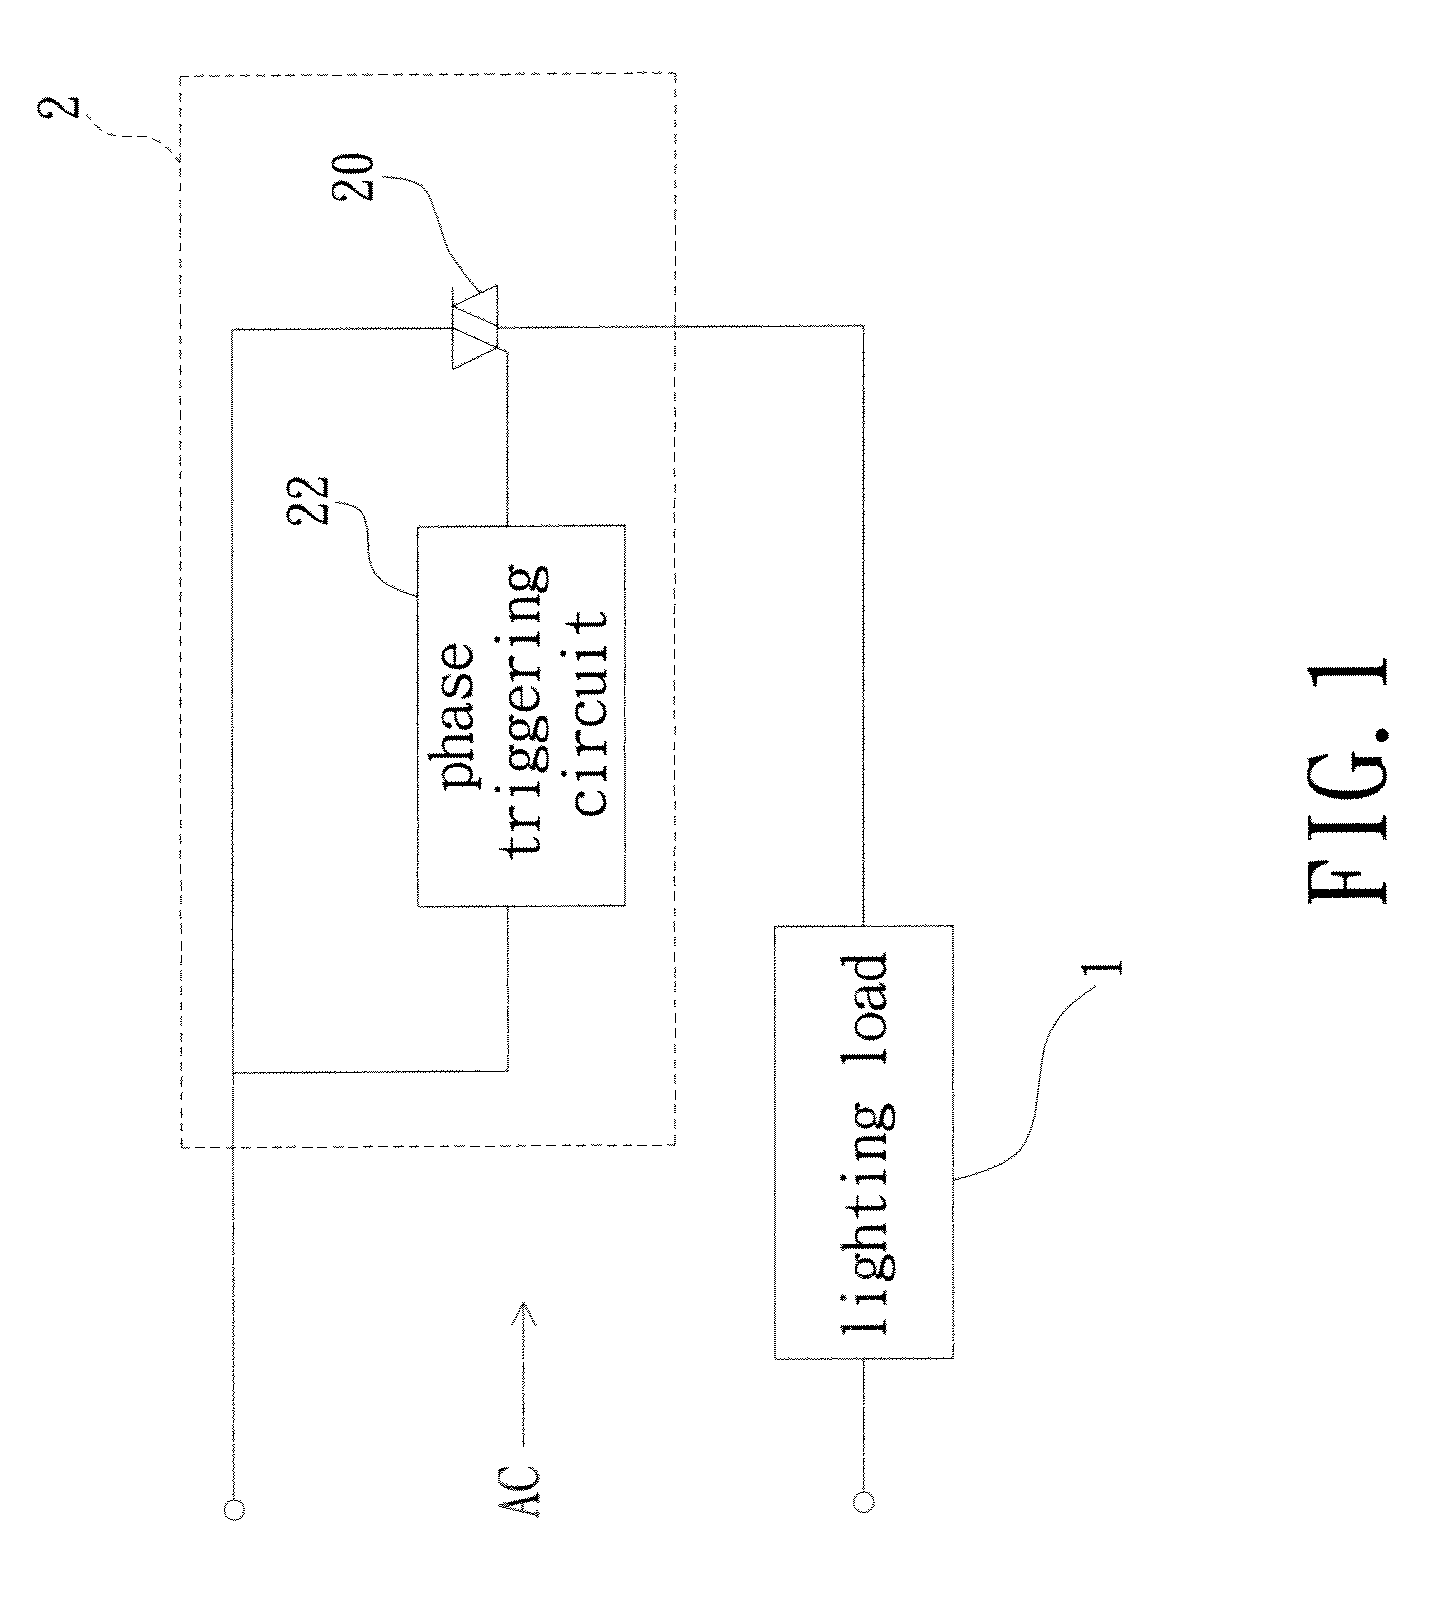 Microcontroller-based lighting control system and method for lighting control